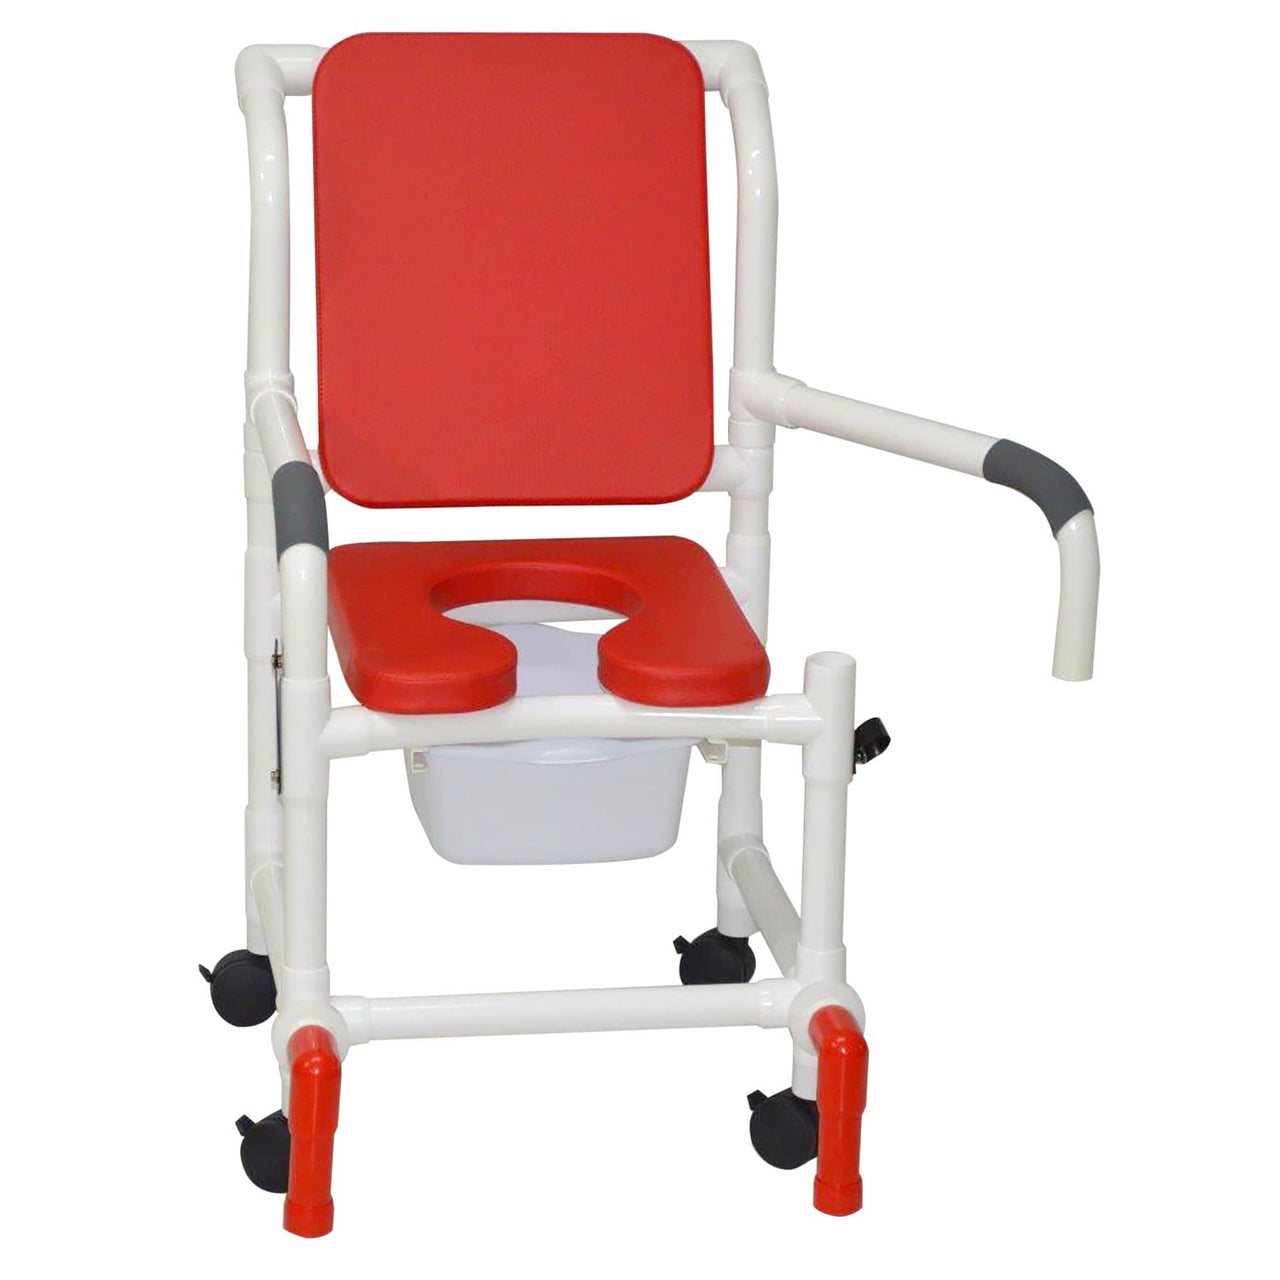 MJM Deluxe Shower Chair with Soft Elongated Commode Seat and Cushion - Senior.com PVC Shower Chairs